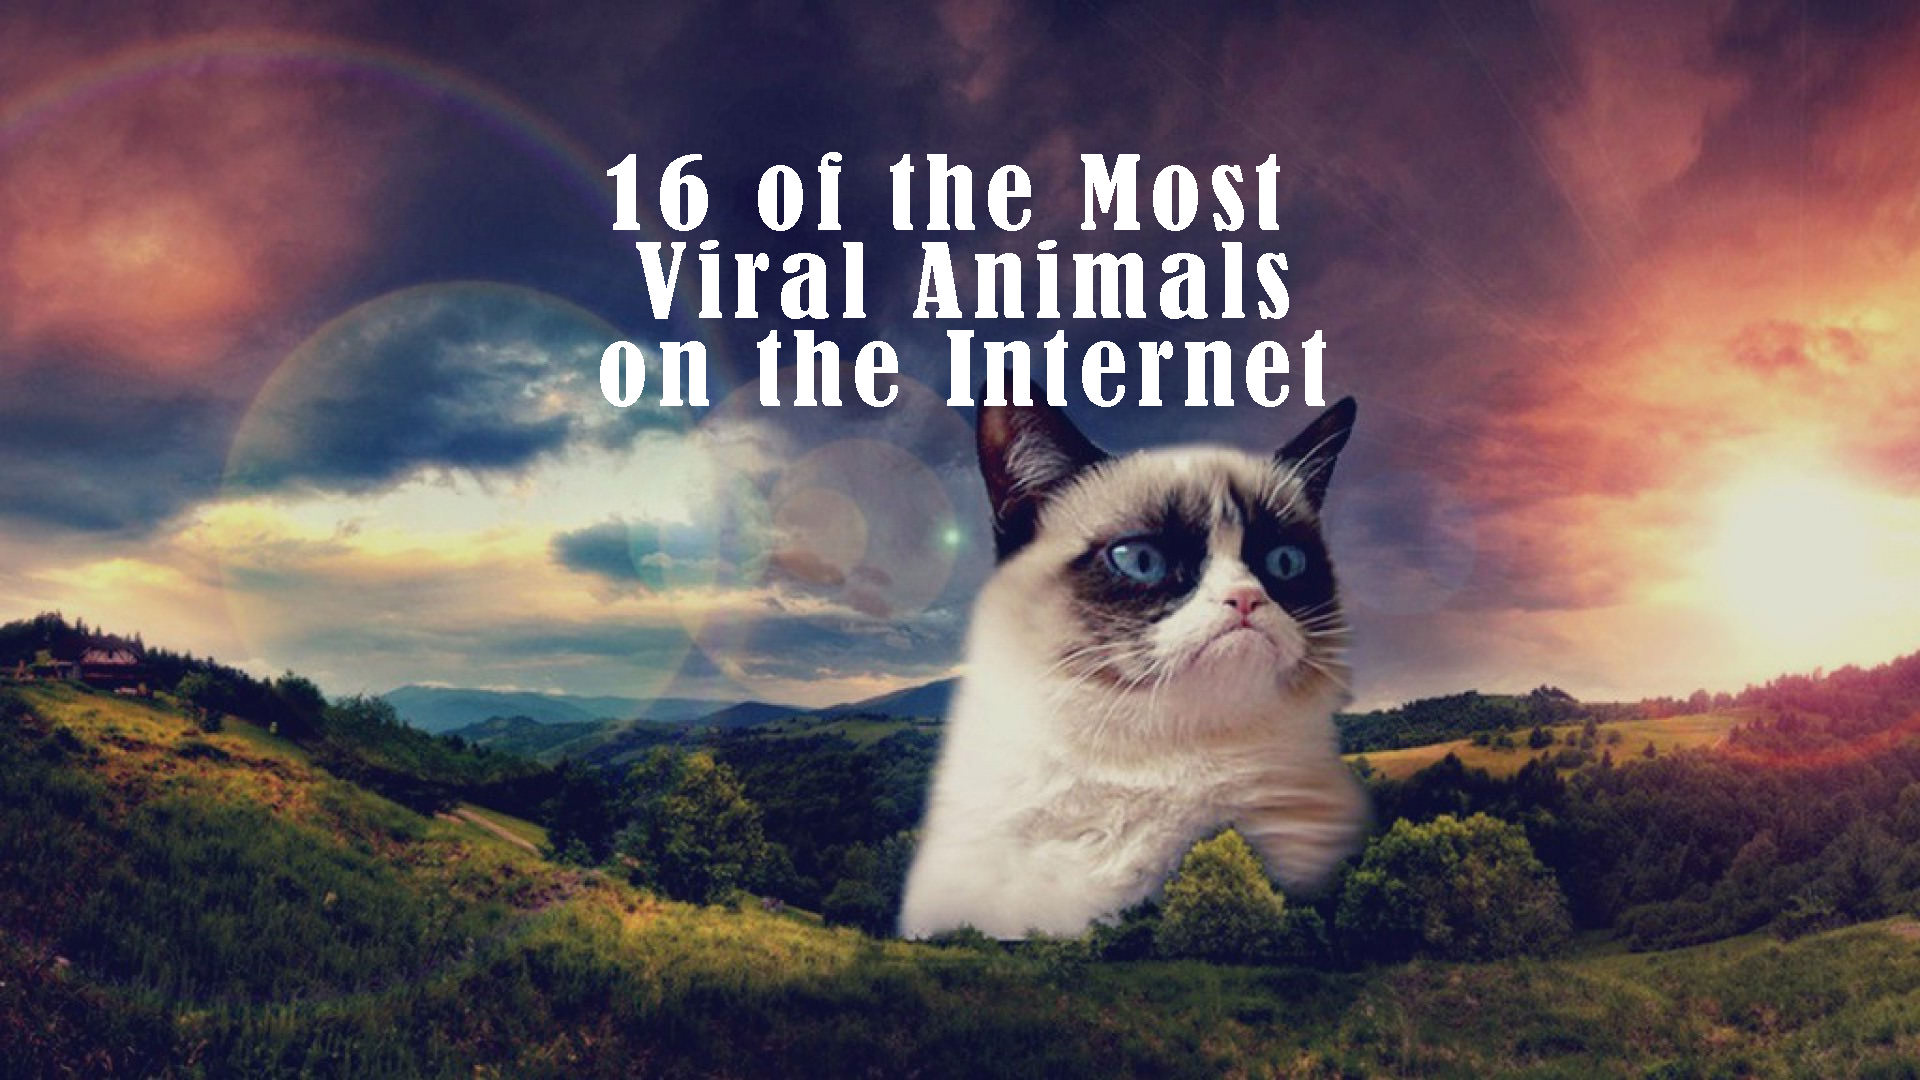 Grumpy Cat and Other Most Viral Animals on the Internet